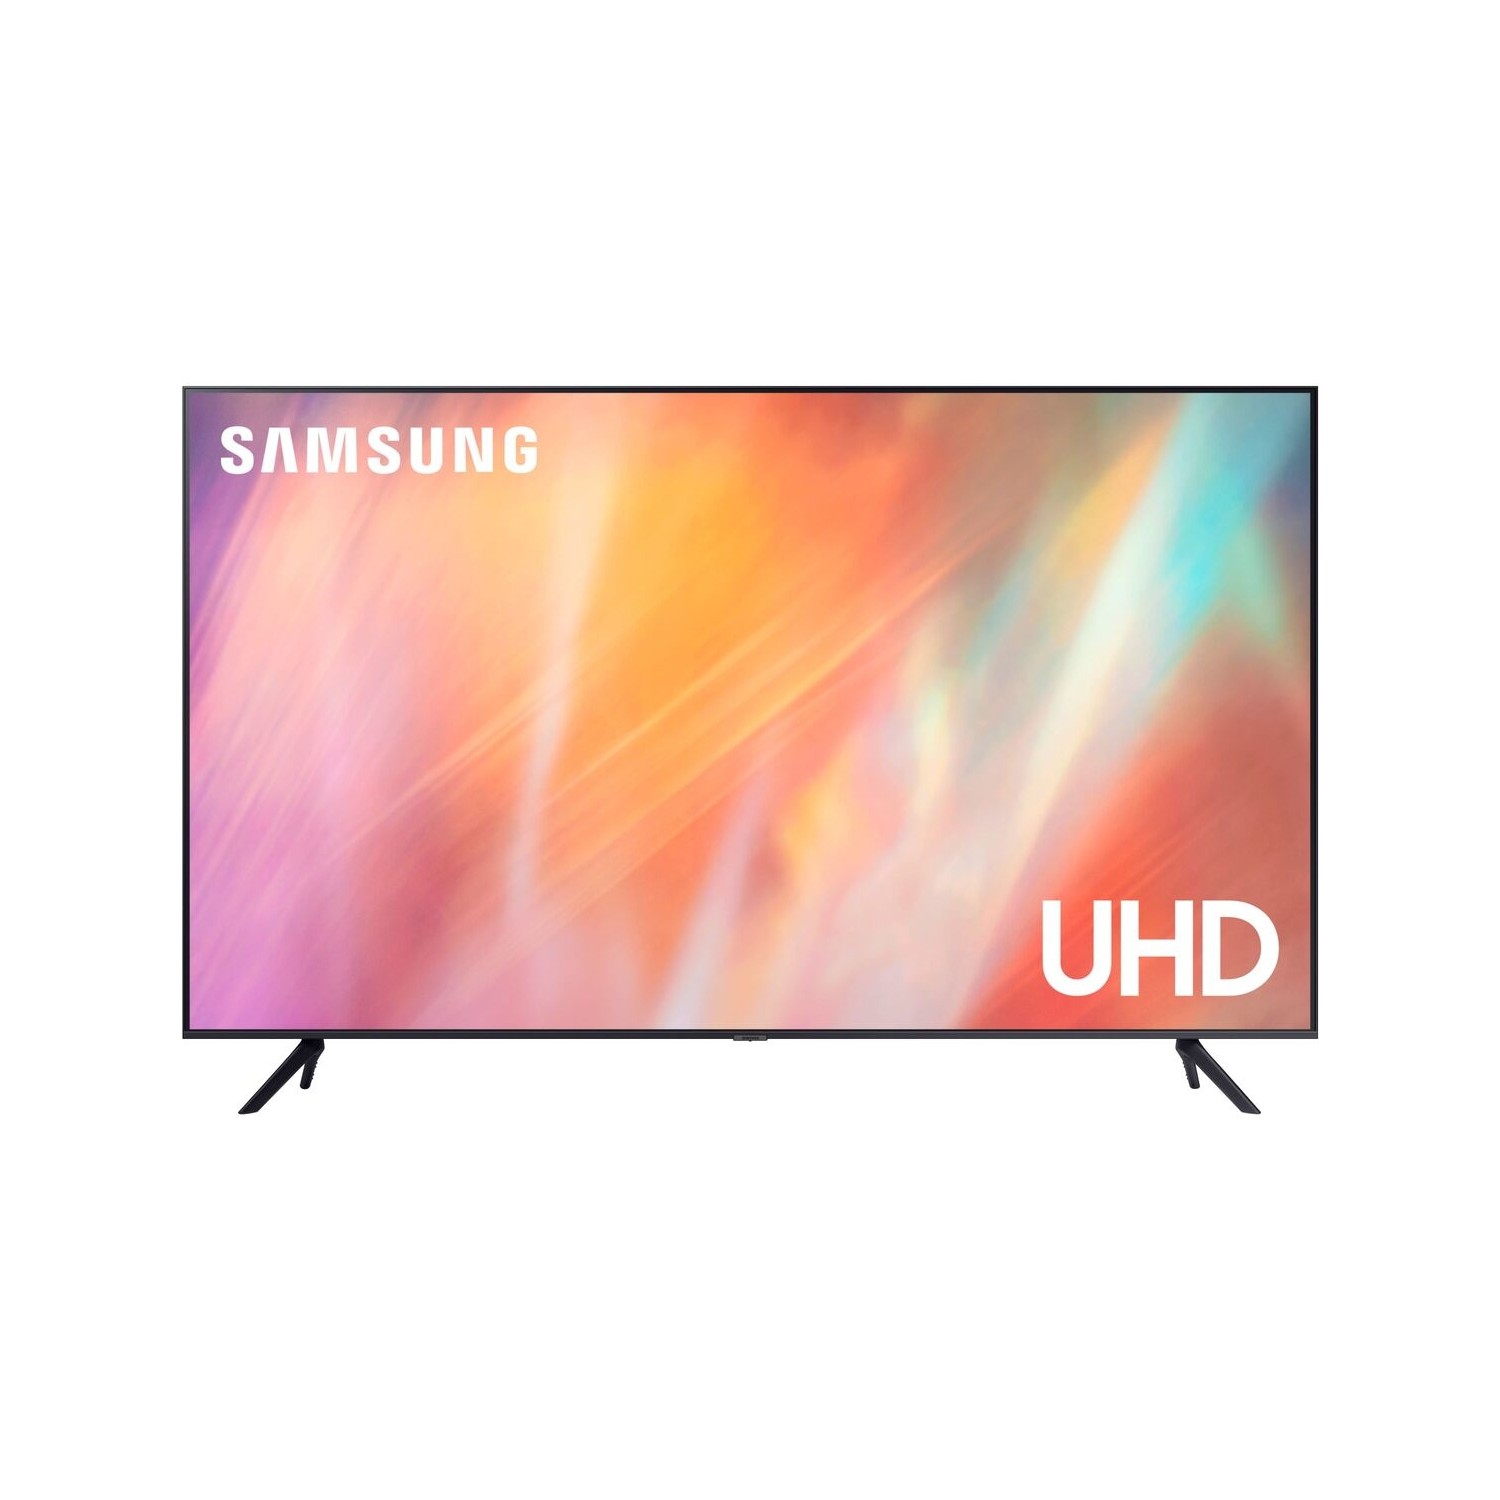 Samsung 65AU7000 65" 165 Screen 4K Ultra HD Smart LED TV with Satellite Receiver